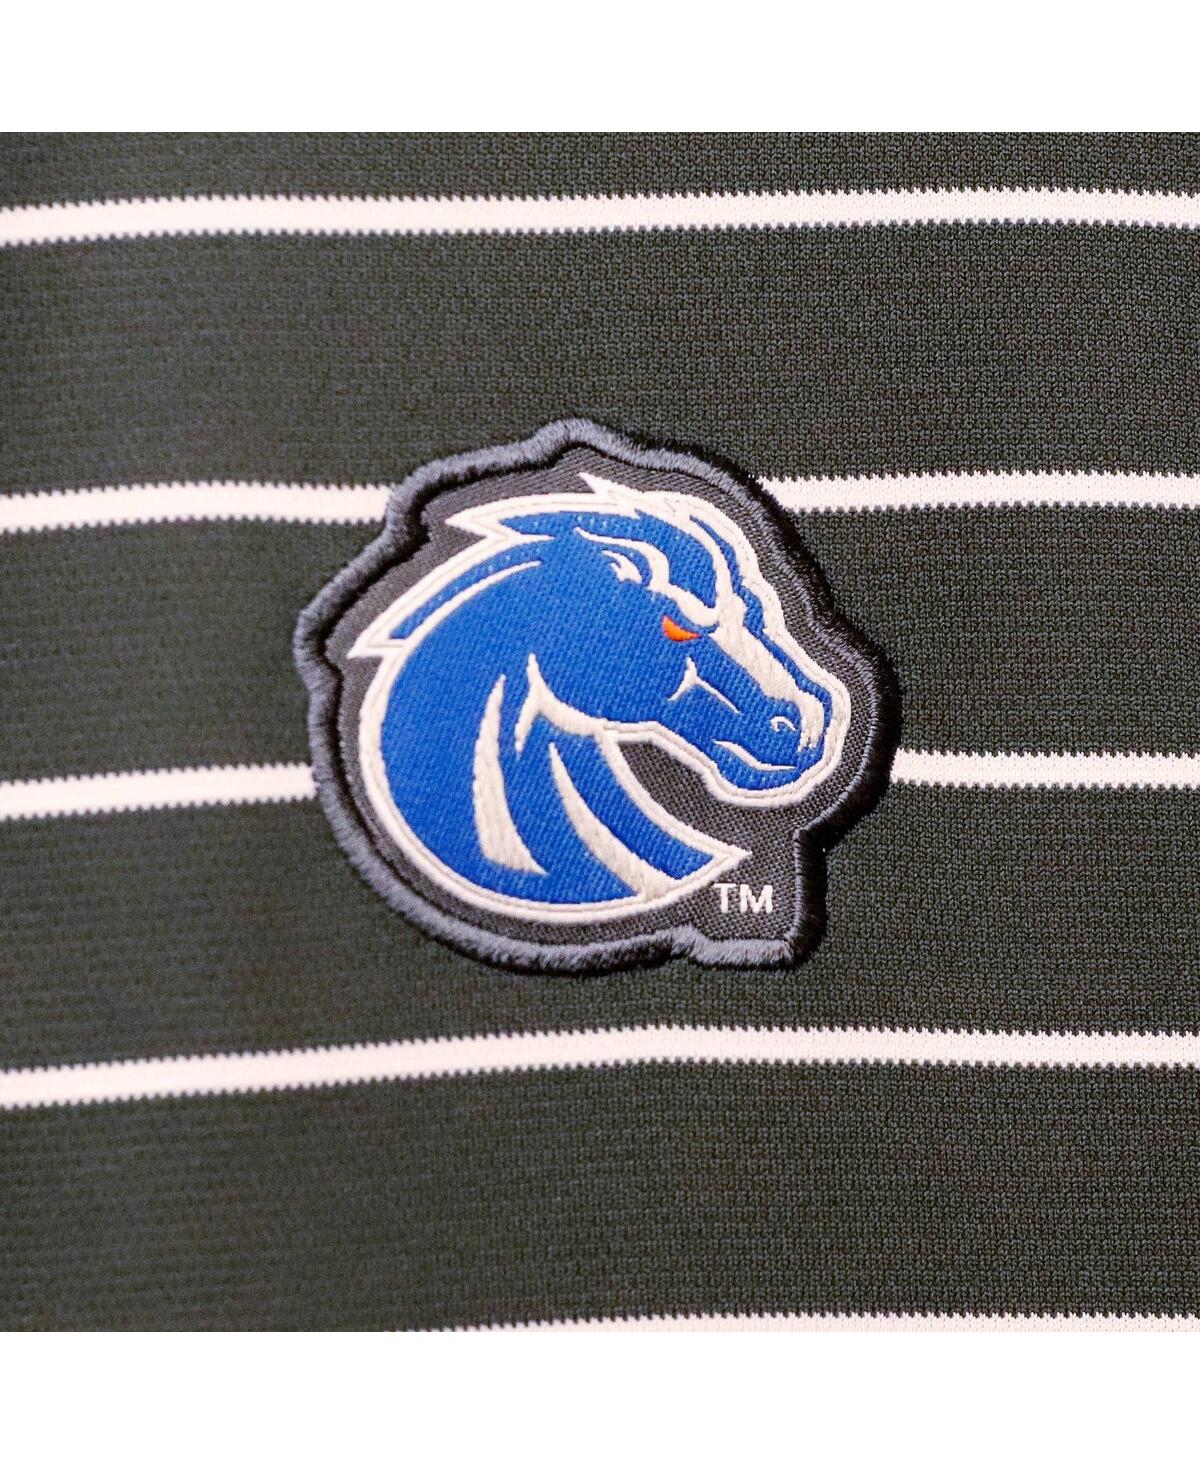 Shop Nike Men's  Anthracite Boise State Broncos Victory Stripe Performance Polo Shirt